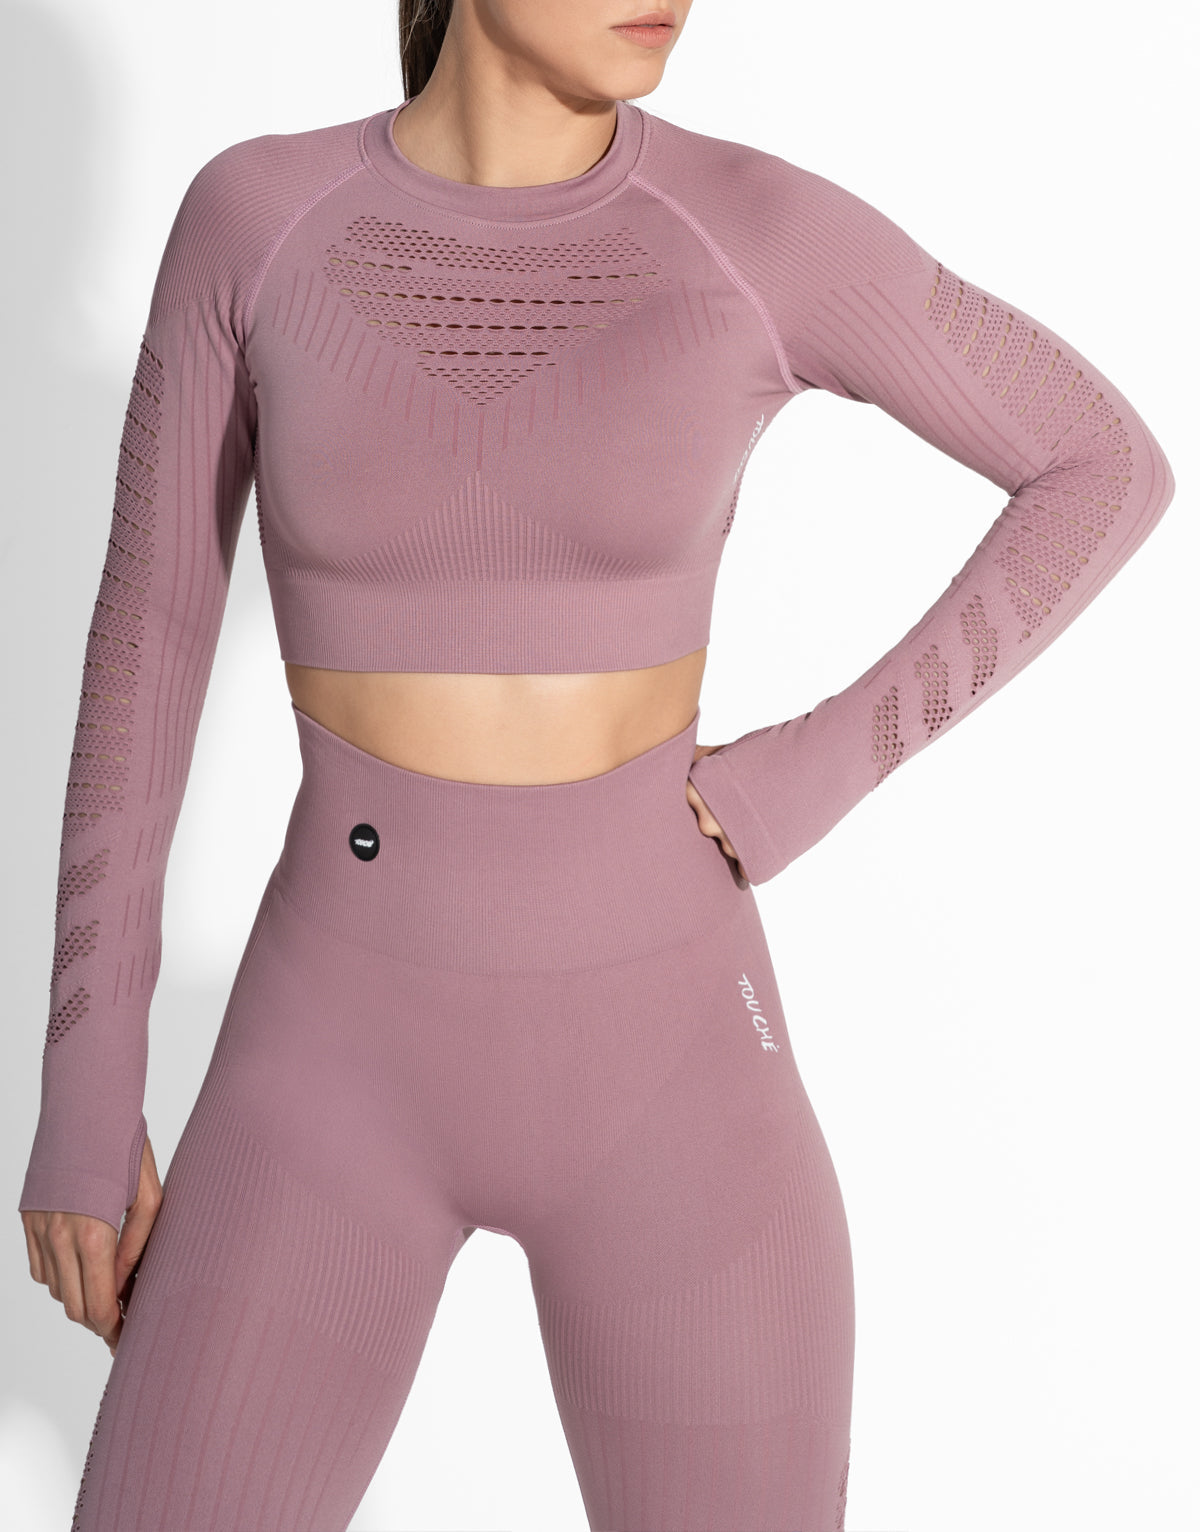 COOL CORE PINK SEAMLESS TOP